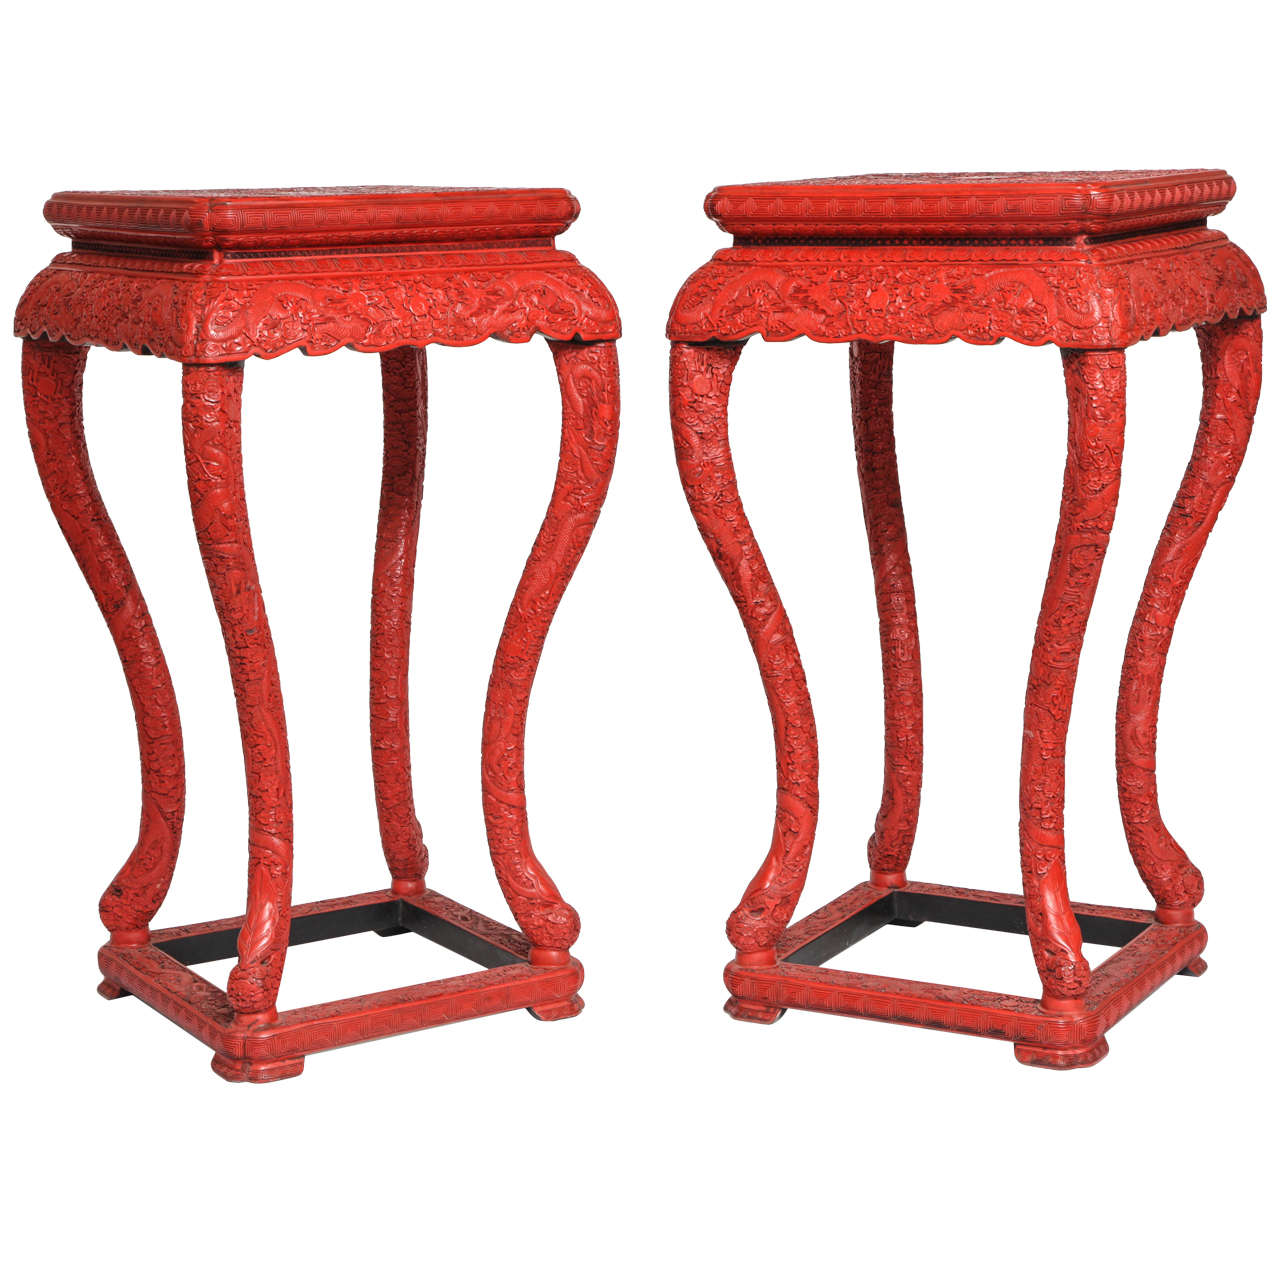 Pair of Chinese Red Cinnabar Square Shaped Stands/Pedestals